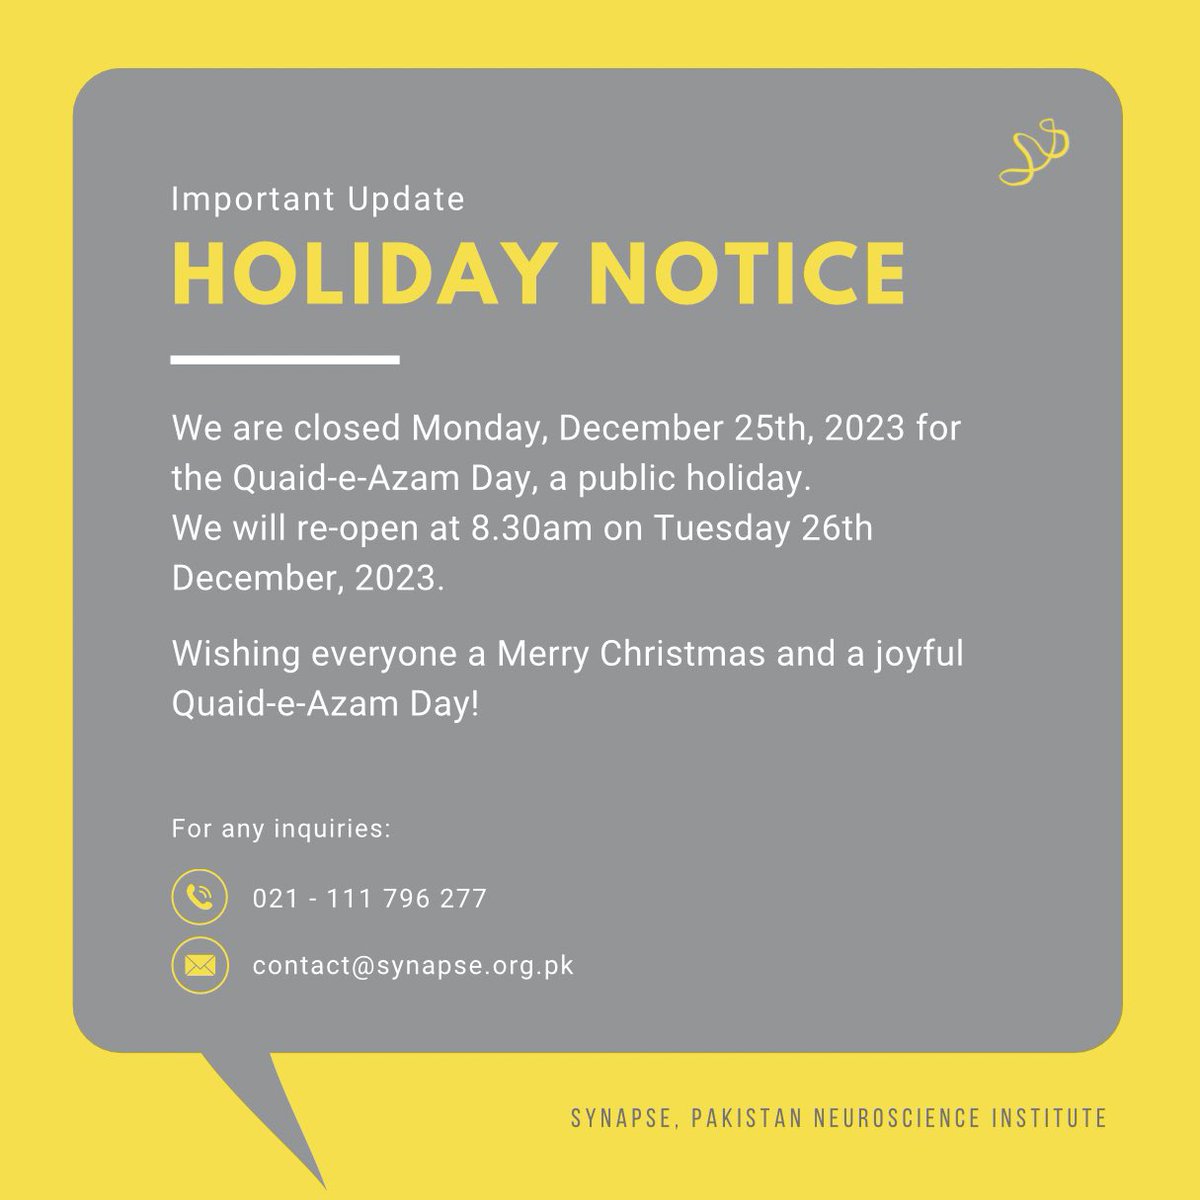 Important Notice: We are closed Monday, December 25th, 2023 for the Quaid-e-Azam Day, a public holiday We will re-open at 8.30am on Tuesday 26th December, 2023 Wishing everyone a Merry Christmas and a joyful Quaid-e-Azam Day!'